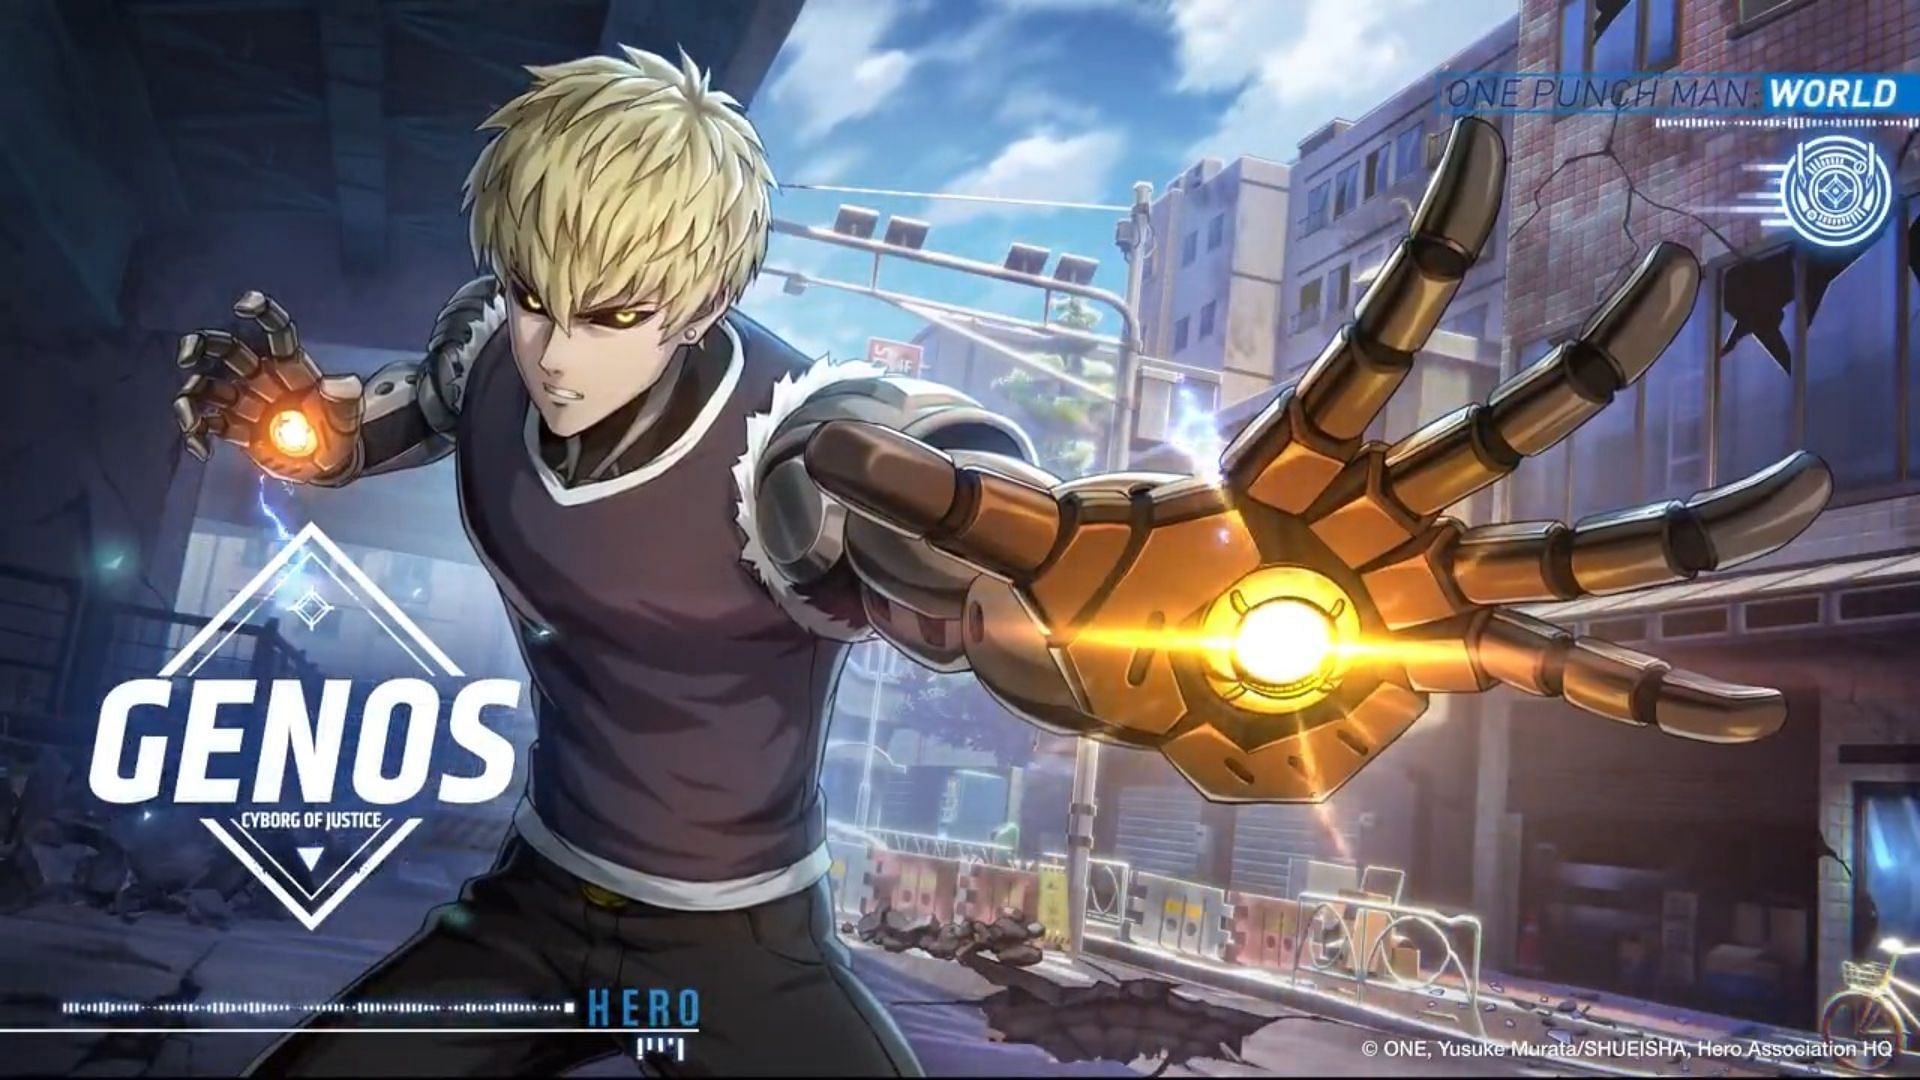 Genos (Cyborg of justice) in One Punch Man World. (Image via Perfect World)